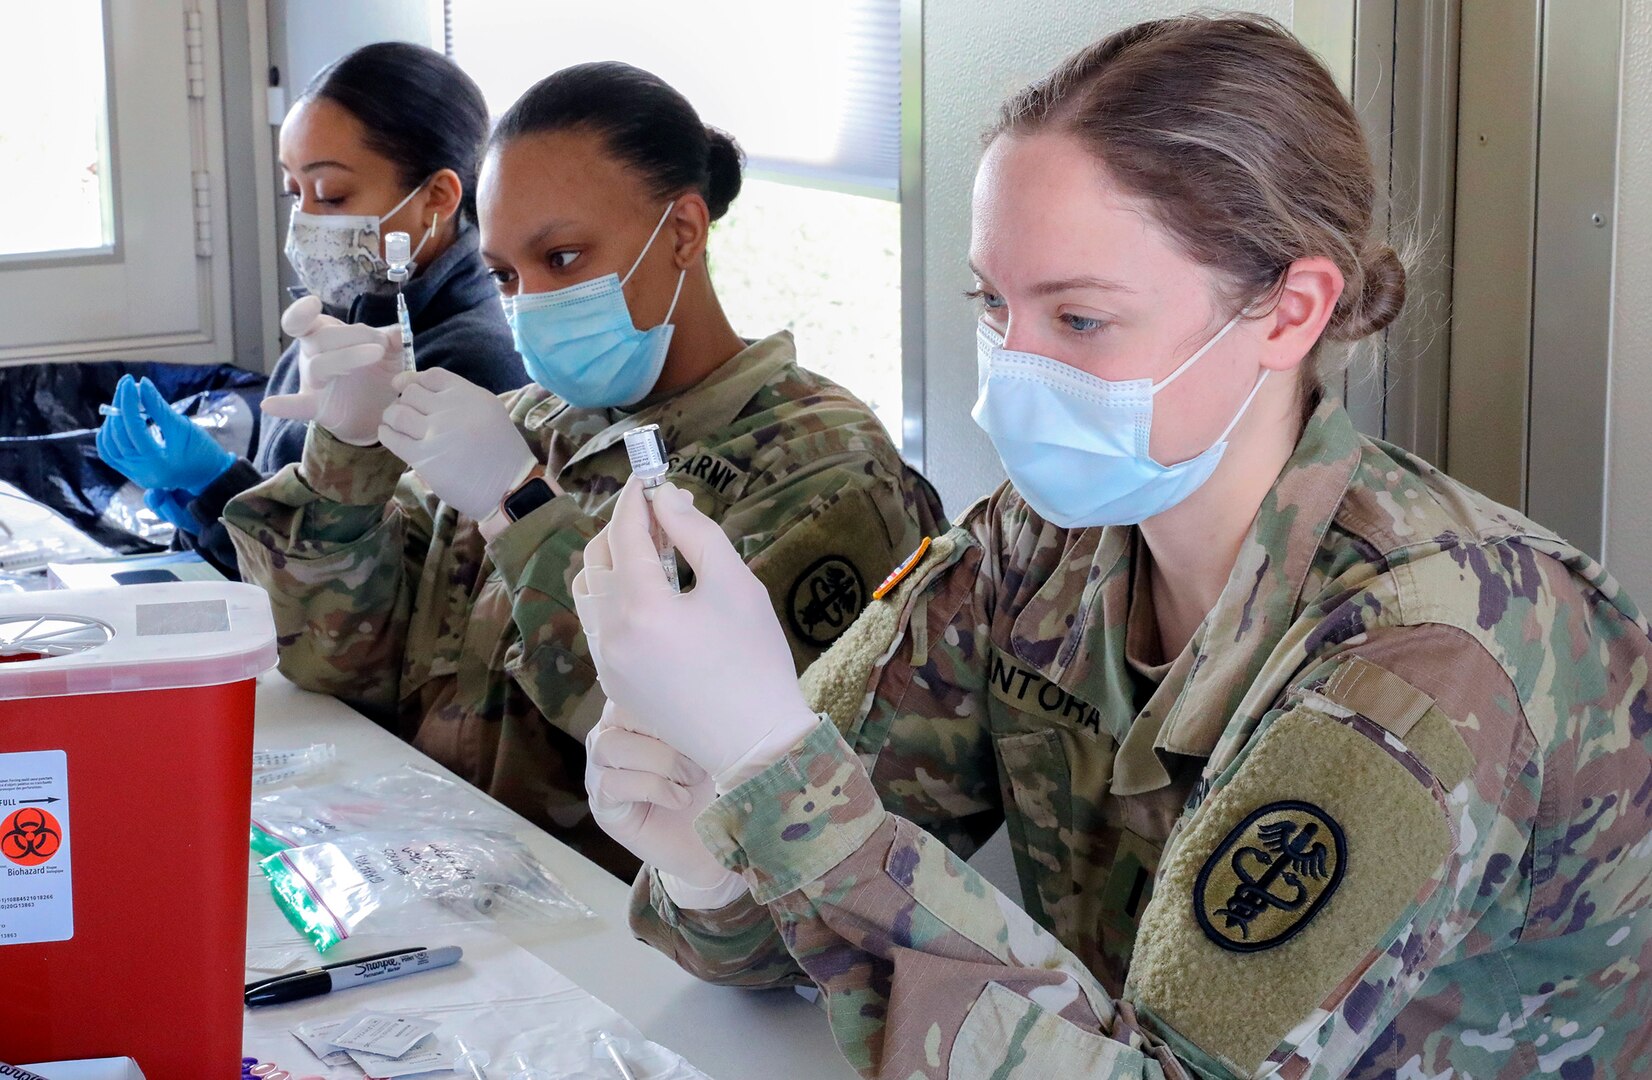 U.S. Army 1st Lt. Abigail Santora (right), a medical surgical nurse at Carl R. Darnall Army Medical Center, Fort Hood, Texas, and 2nd Lt. Sharice Jones (center), a medical surgical nurse at Brooke Army Medical Center, Joint Base San Antonio-Fort Sam Houston, work alongside Federal Emergency Management Agency volunteer medical staff to prepare COVID-19 vaccines at the Fair Park COVID-19 Community Vaccination Centers  in Dallas March 2.